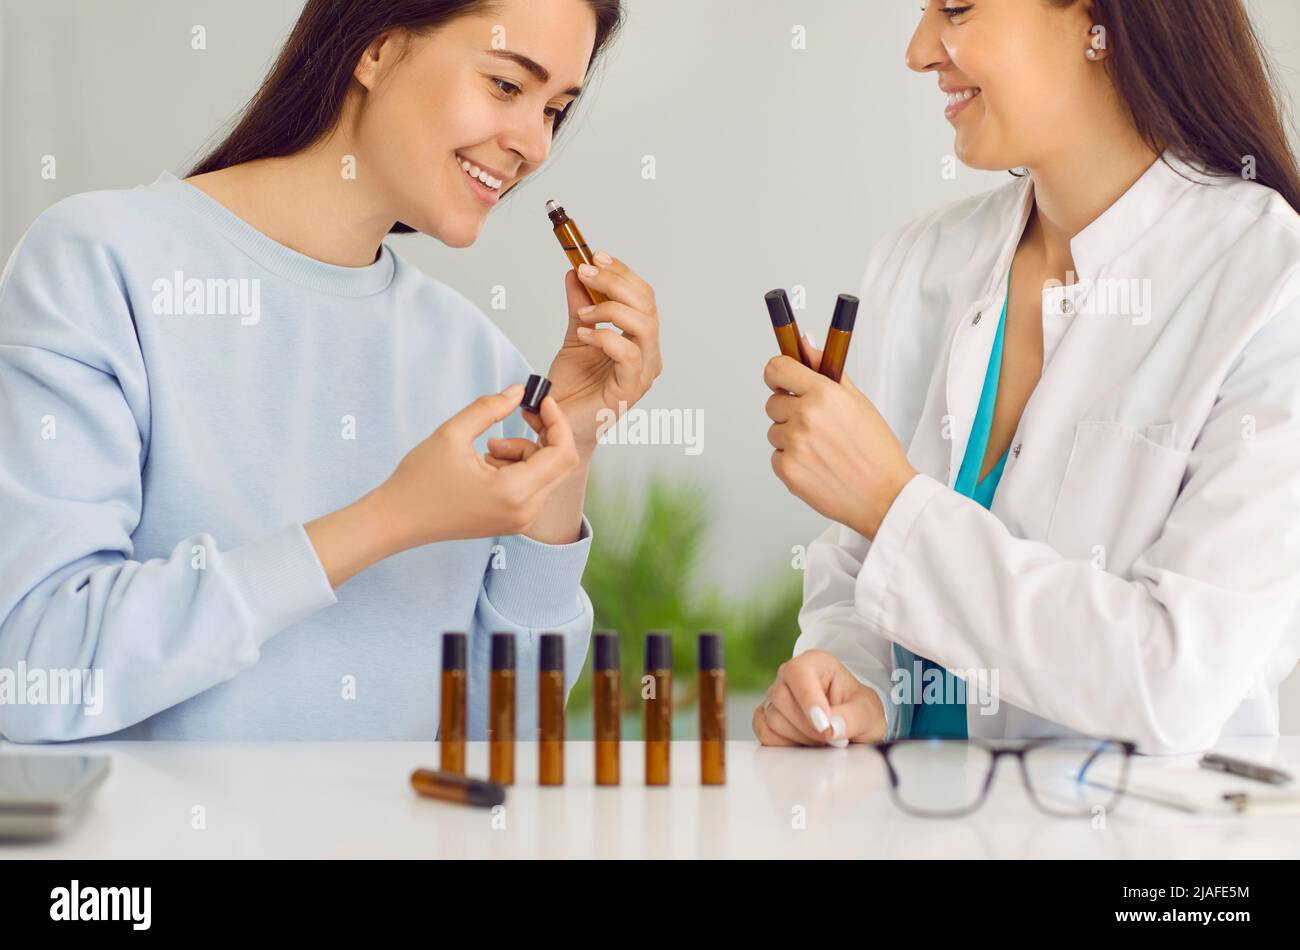 Joyful young woman chooses scent of essential oil when visiting female homeopathic doctor. Stock Photo